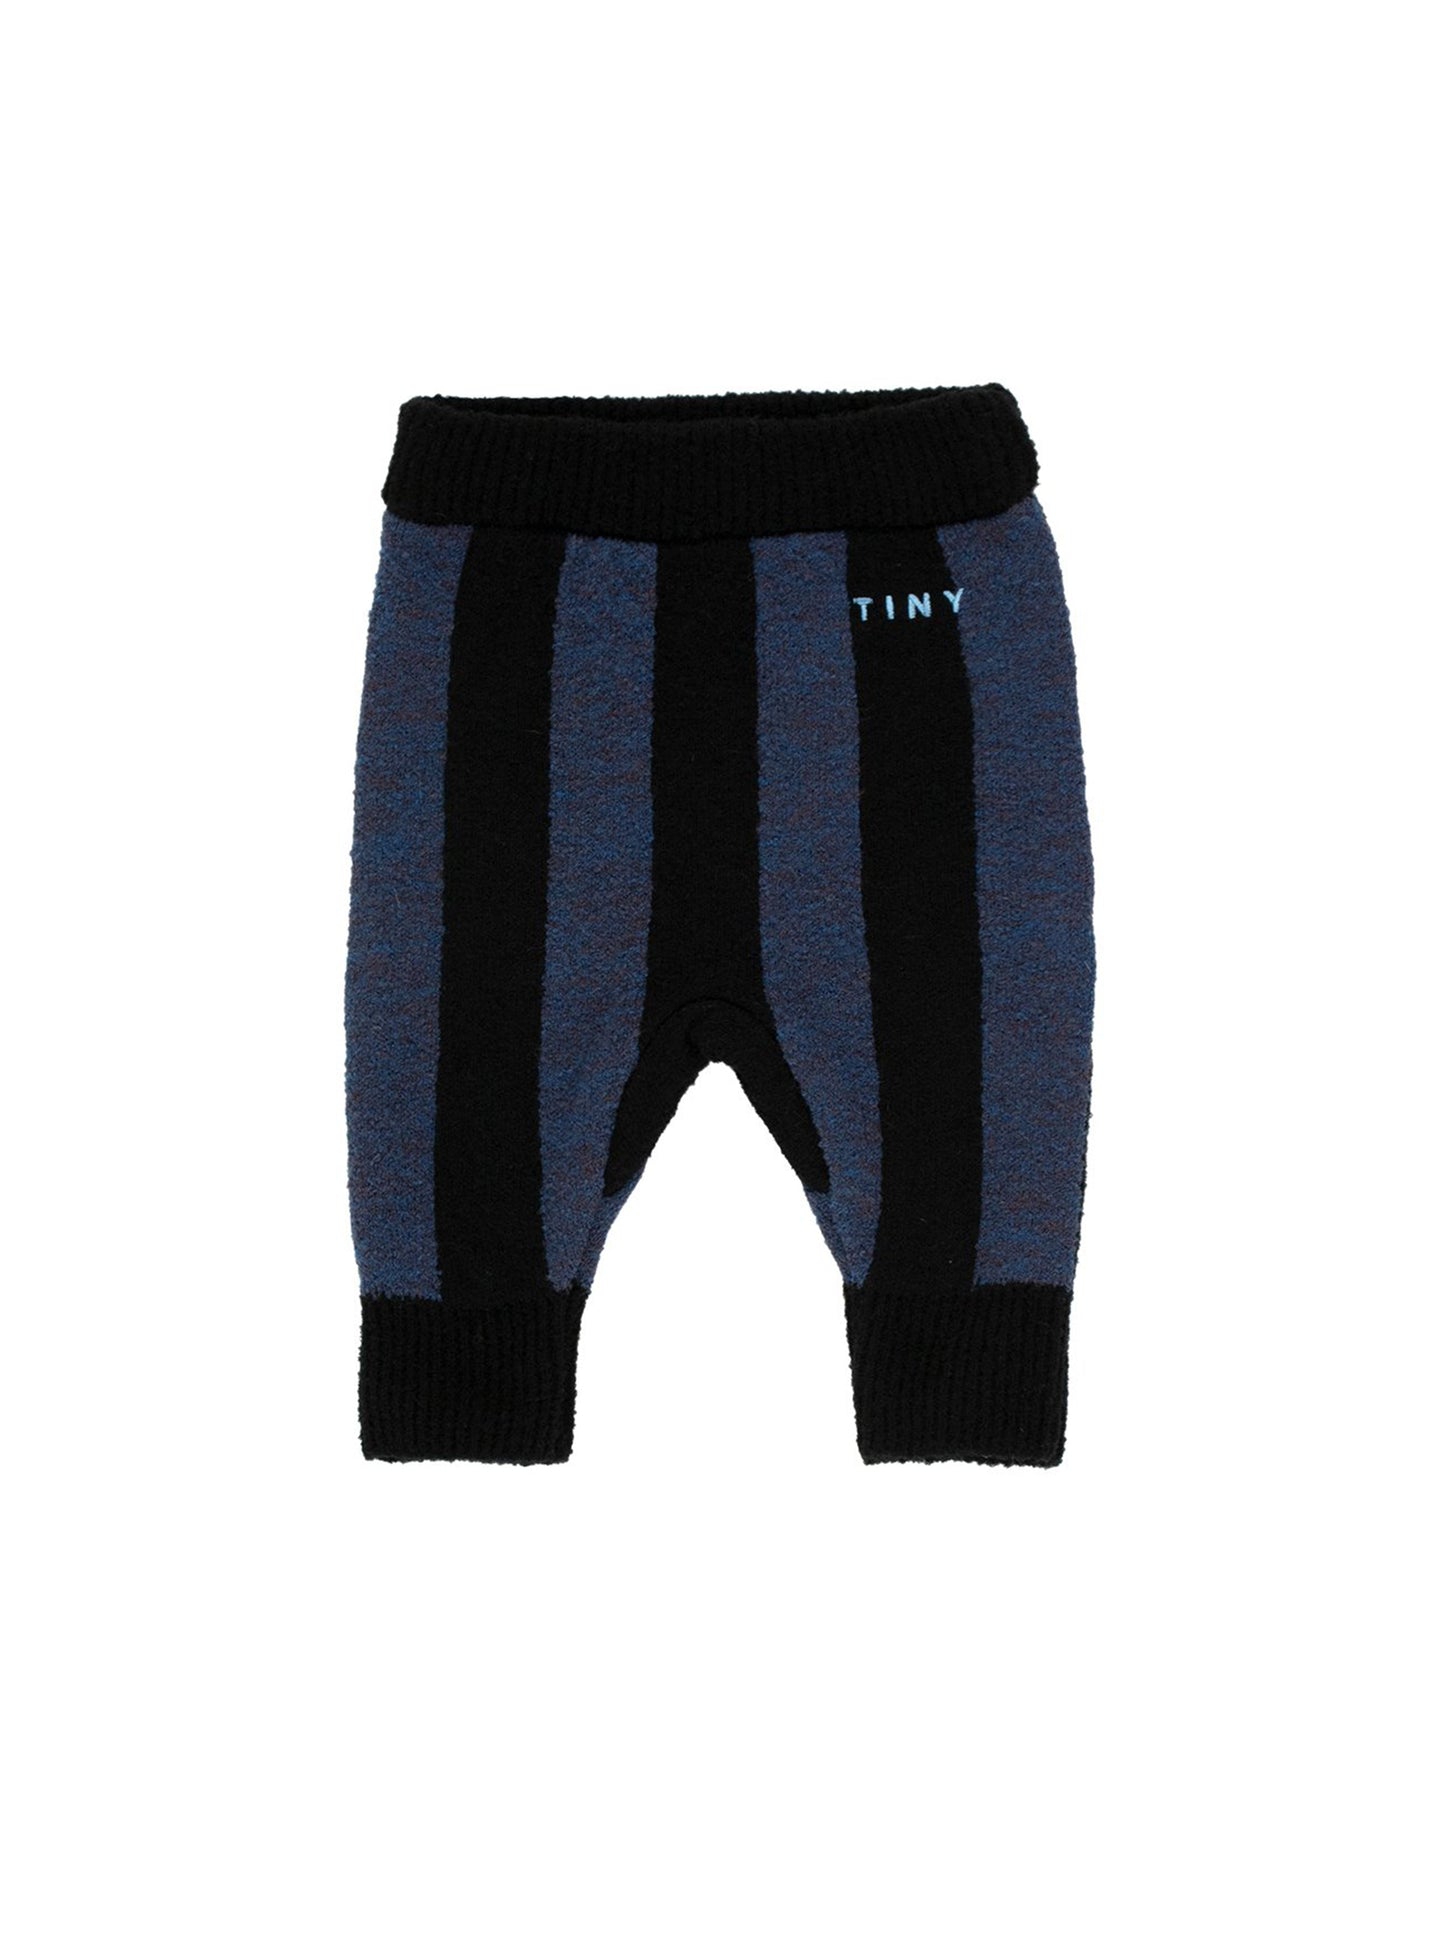 [6m OR 9m] TINYCOTTONS Stripes Pant in Black/True Navy